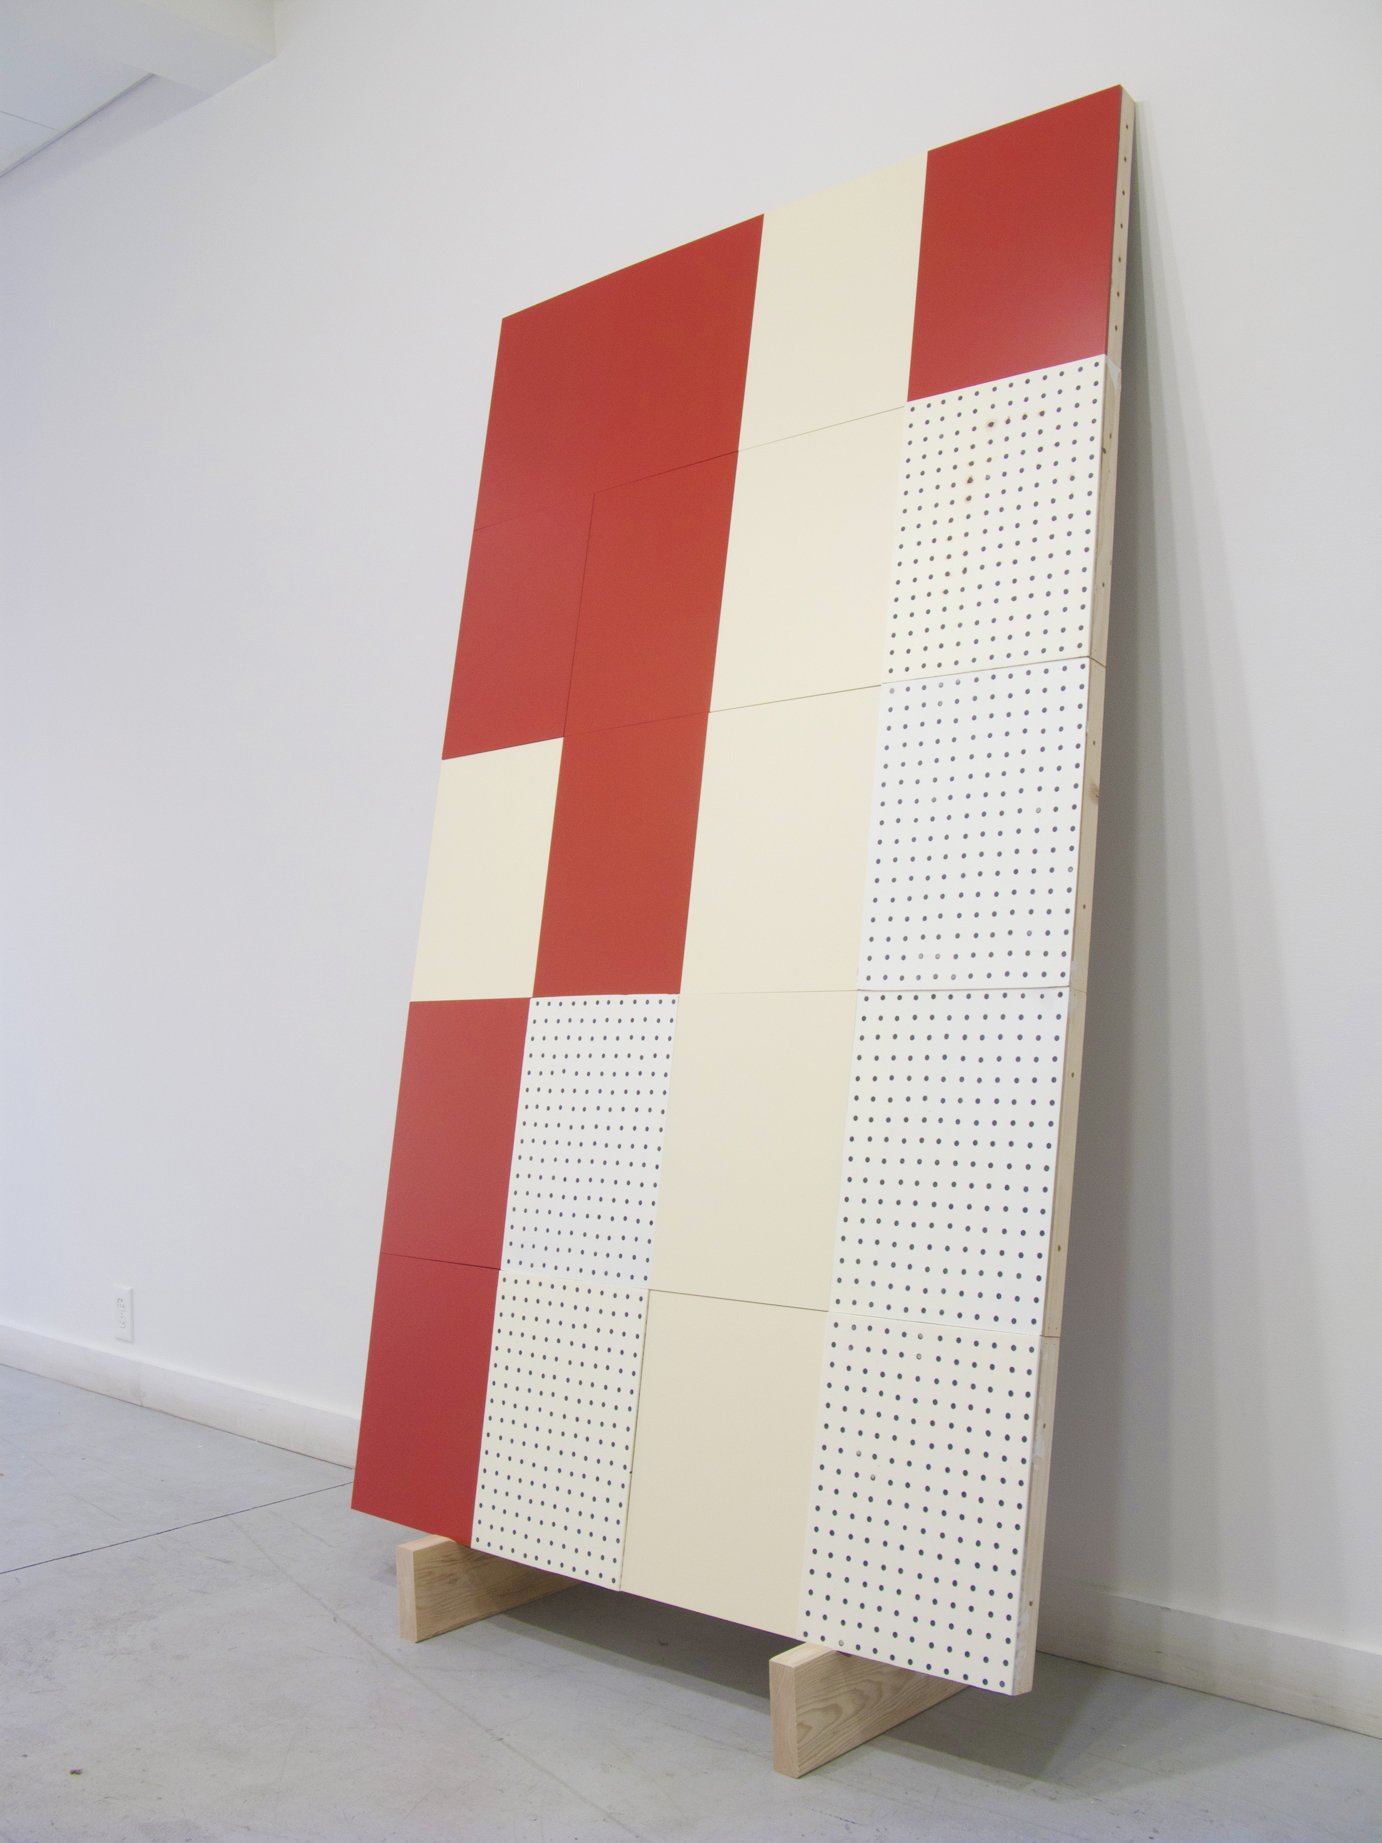   Standard Sewanee.  Furniture lacquer, cast plastic, and pigment on wood panels. 48” x 84”. University of the South. 2012 